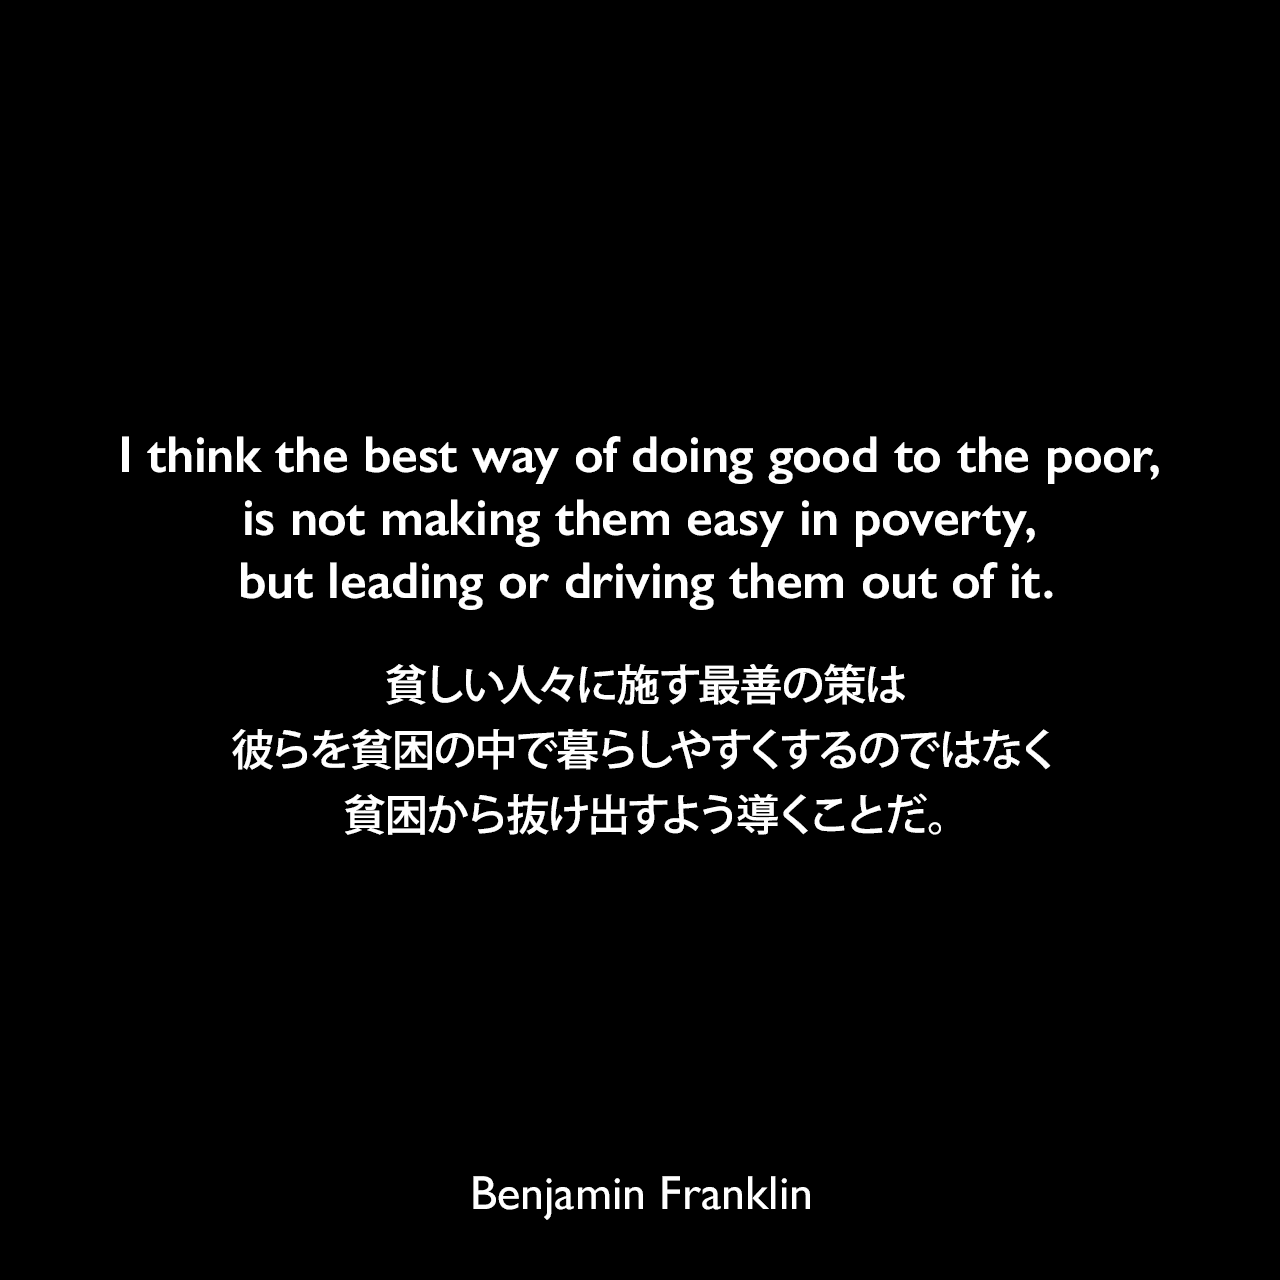 I think the best way of doing good to the poor, is not making them easy in poverty, but leading or driving them out of it.貧しい人々に施す最善の策は、彼らを貧困の中で暮らしやすくするのではなく、貧困から抜け出すよう導くことだ。- 「On the Price of Corn, and Management of the Poor（1766年）」よりBenjamin Franklin